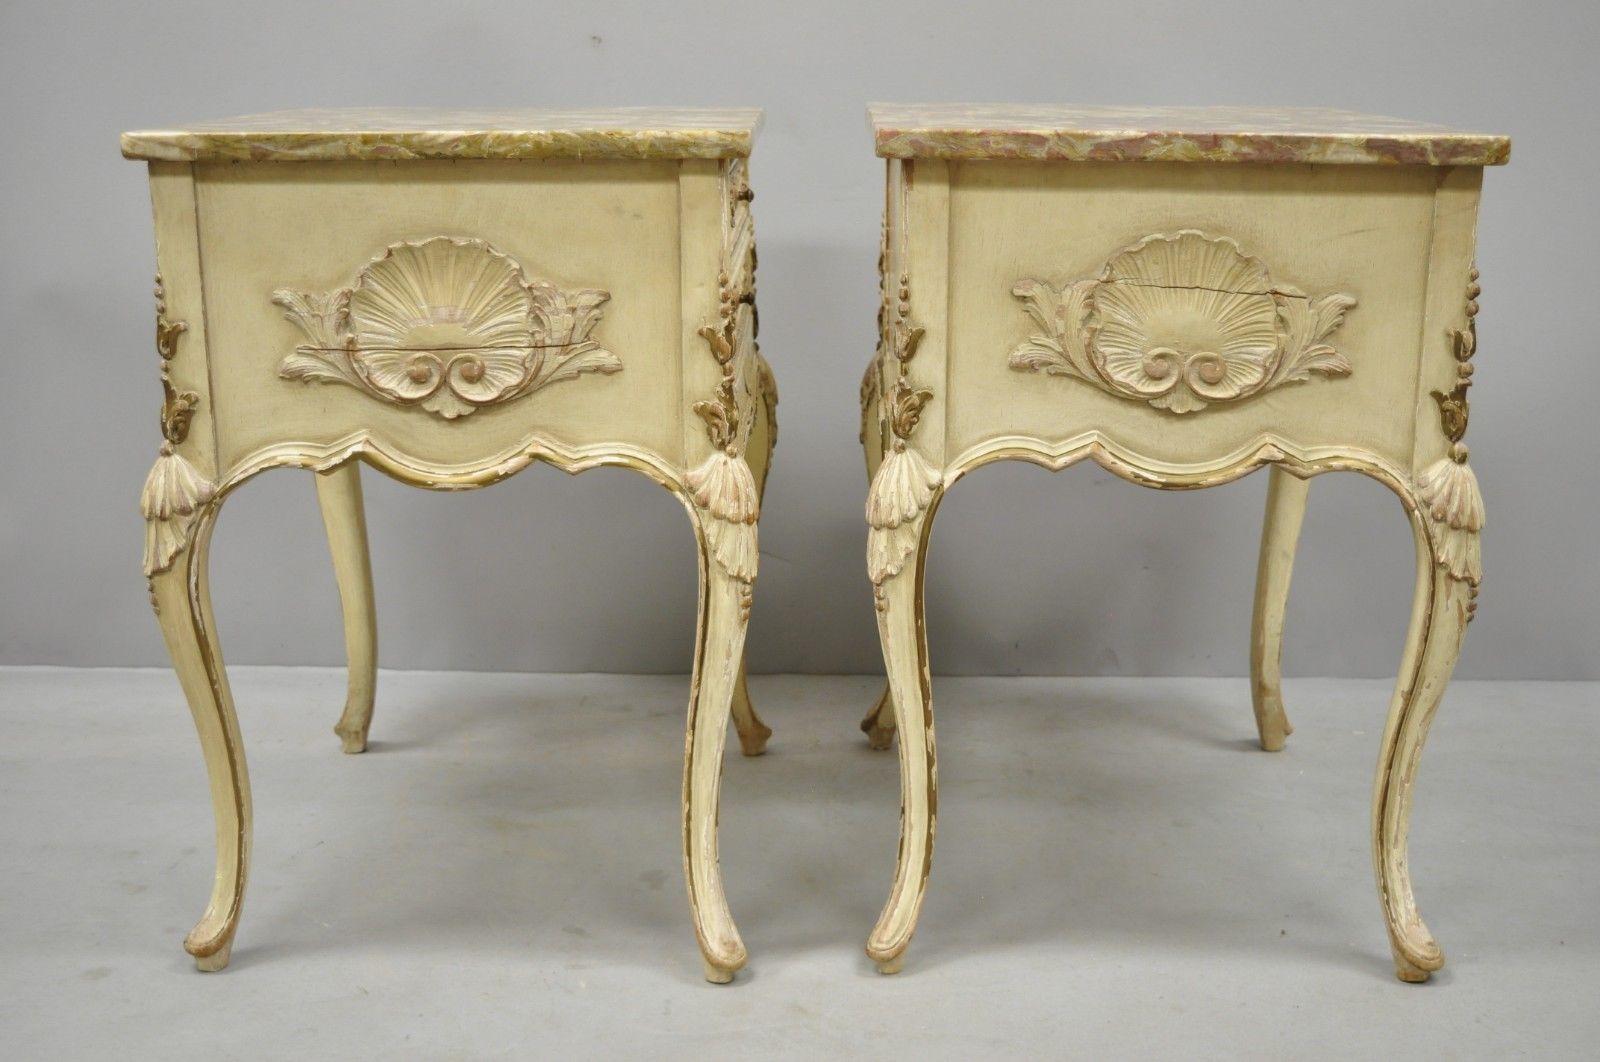 Pair of Distress Painted Louis XV Marble-Top Nightstands or End Tables by Danby 2